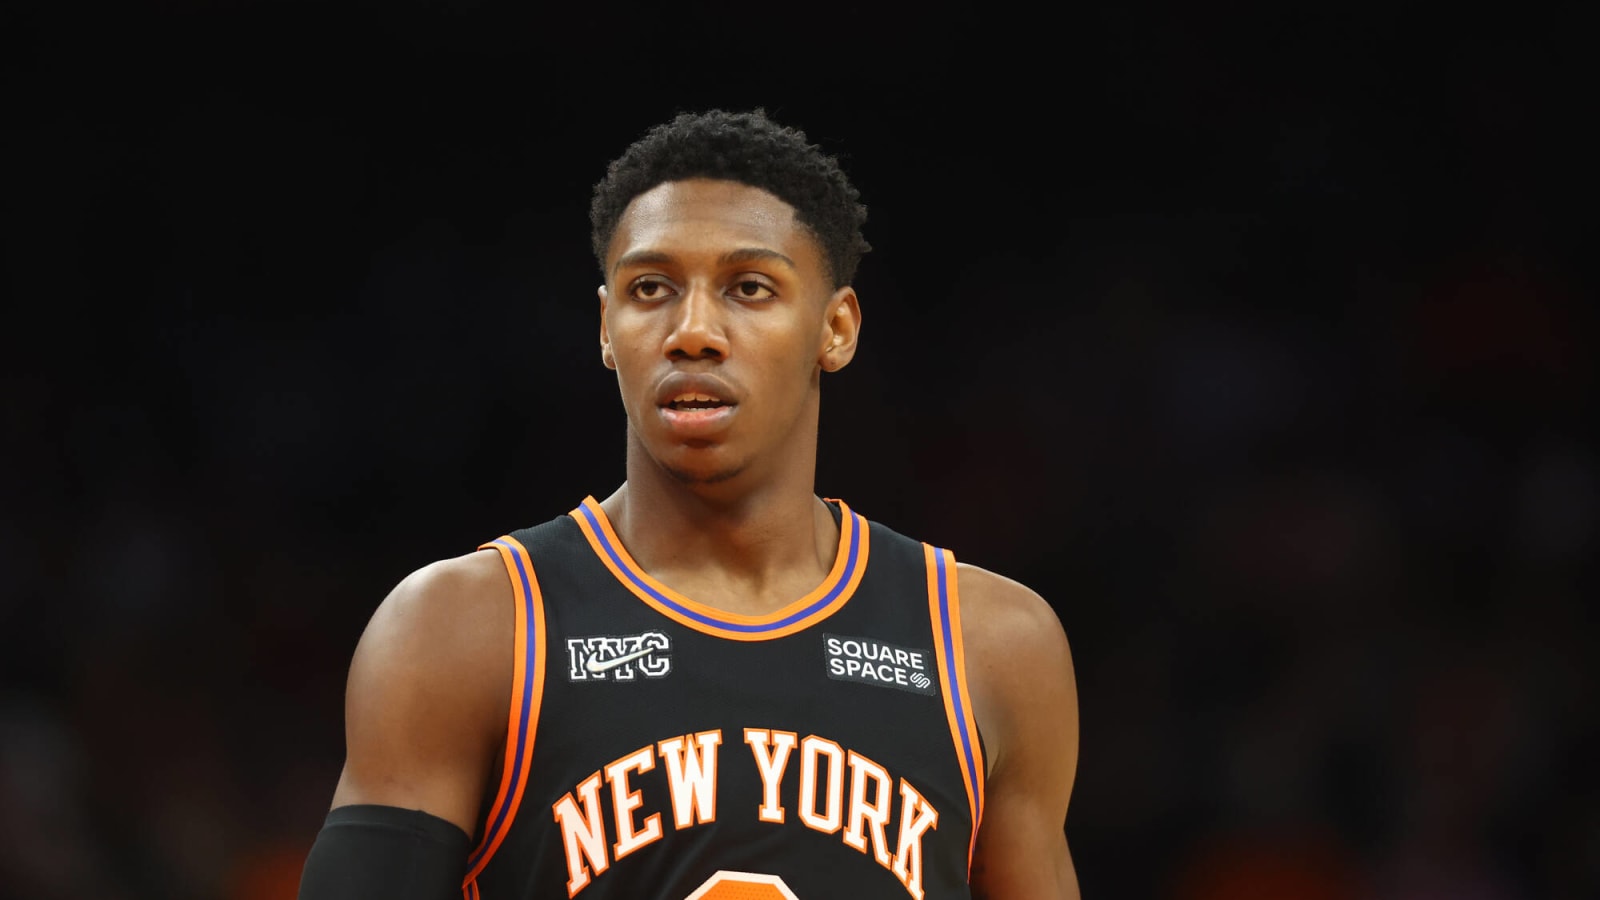 The Knicks’ success next season hangs on the development of one player